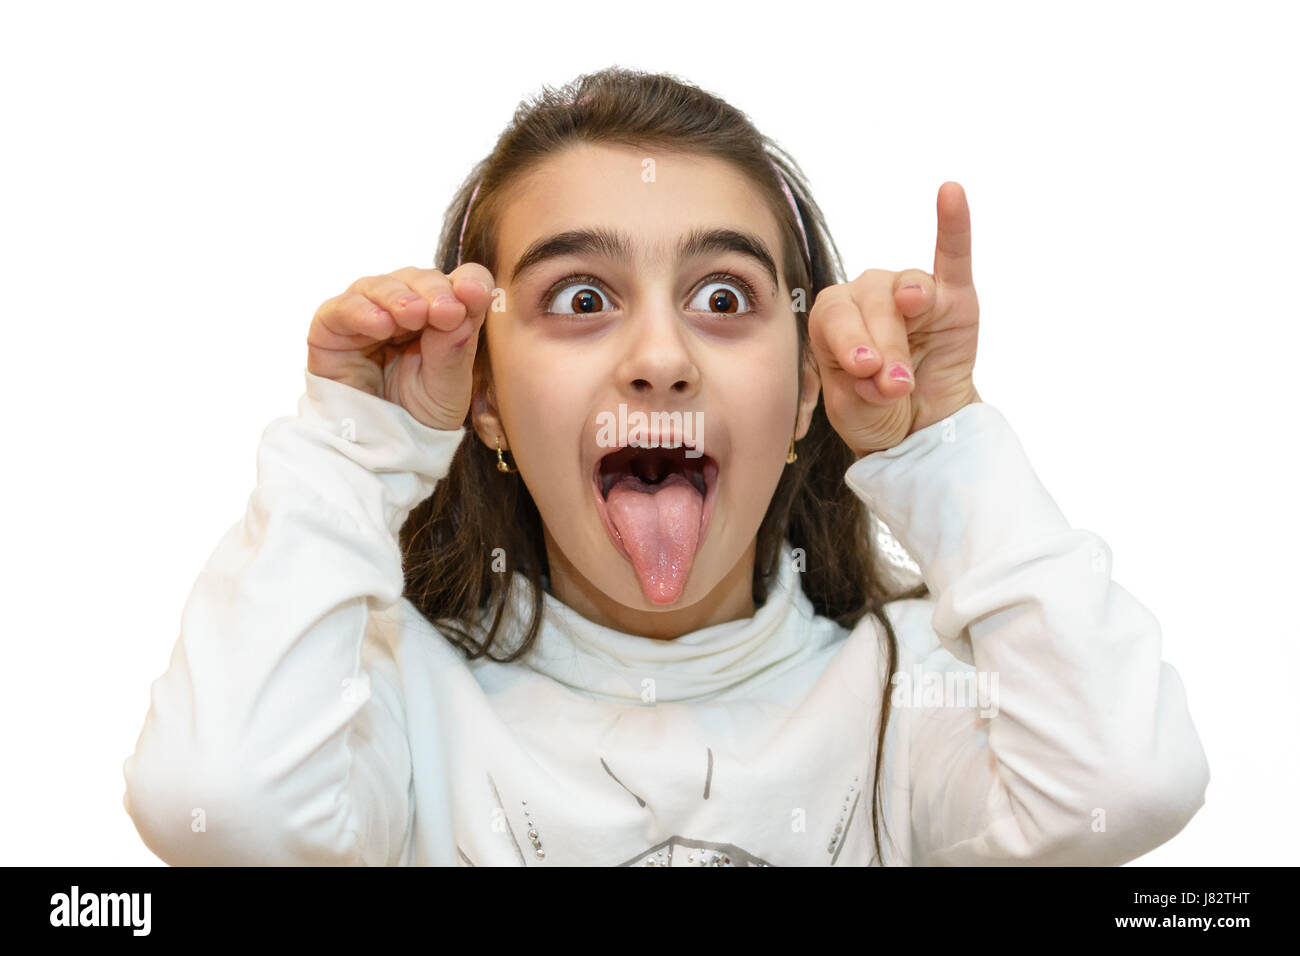 Portrait of young little girl with a grimace of derision Stock Photo